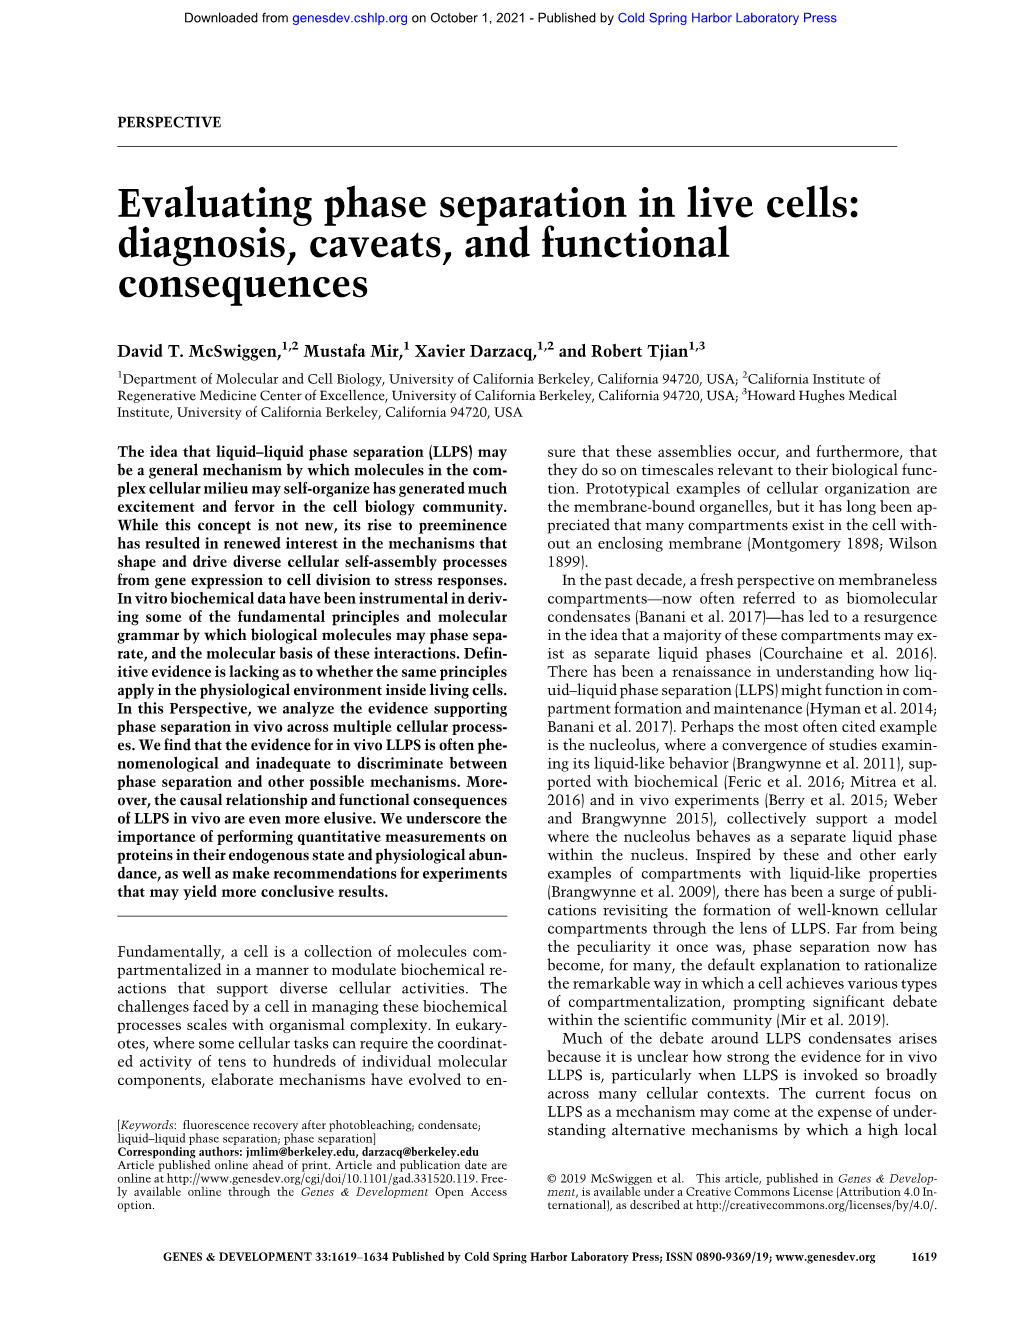 Evaluating Phase Separation in Live Cells: Diagnosis, Caveats, and Functional Consequences